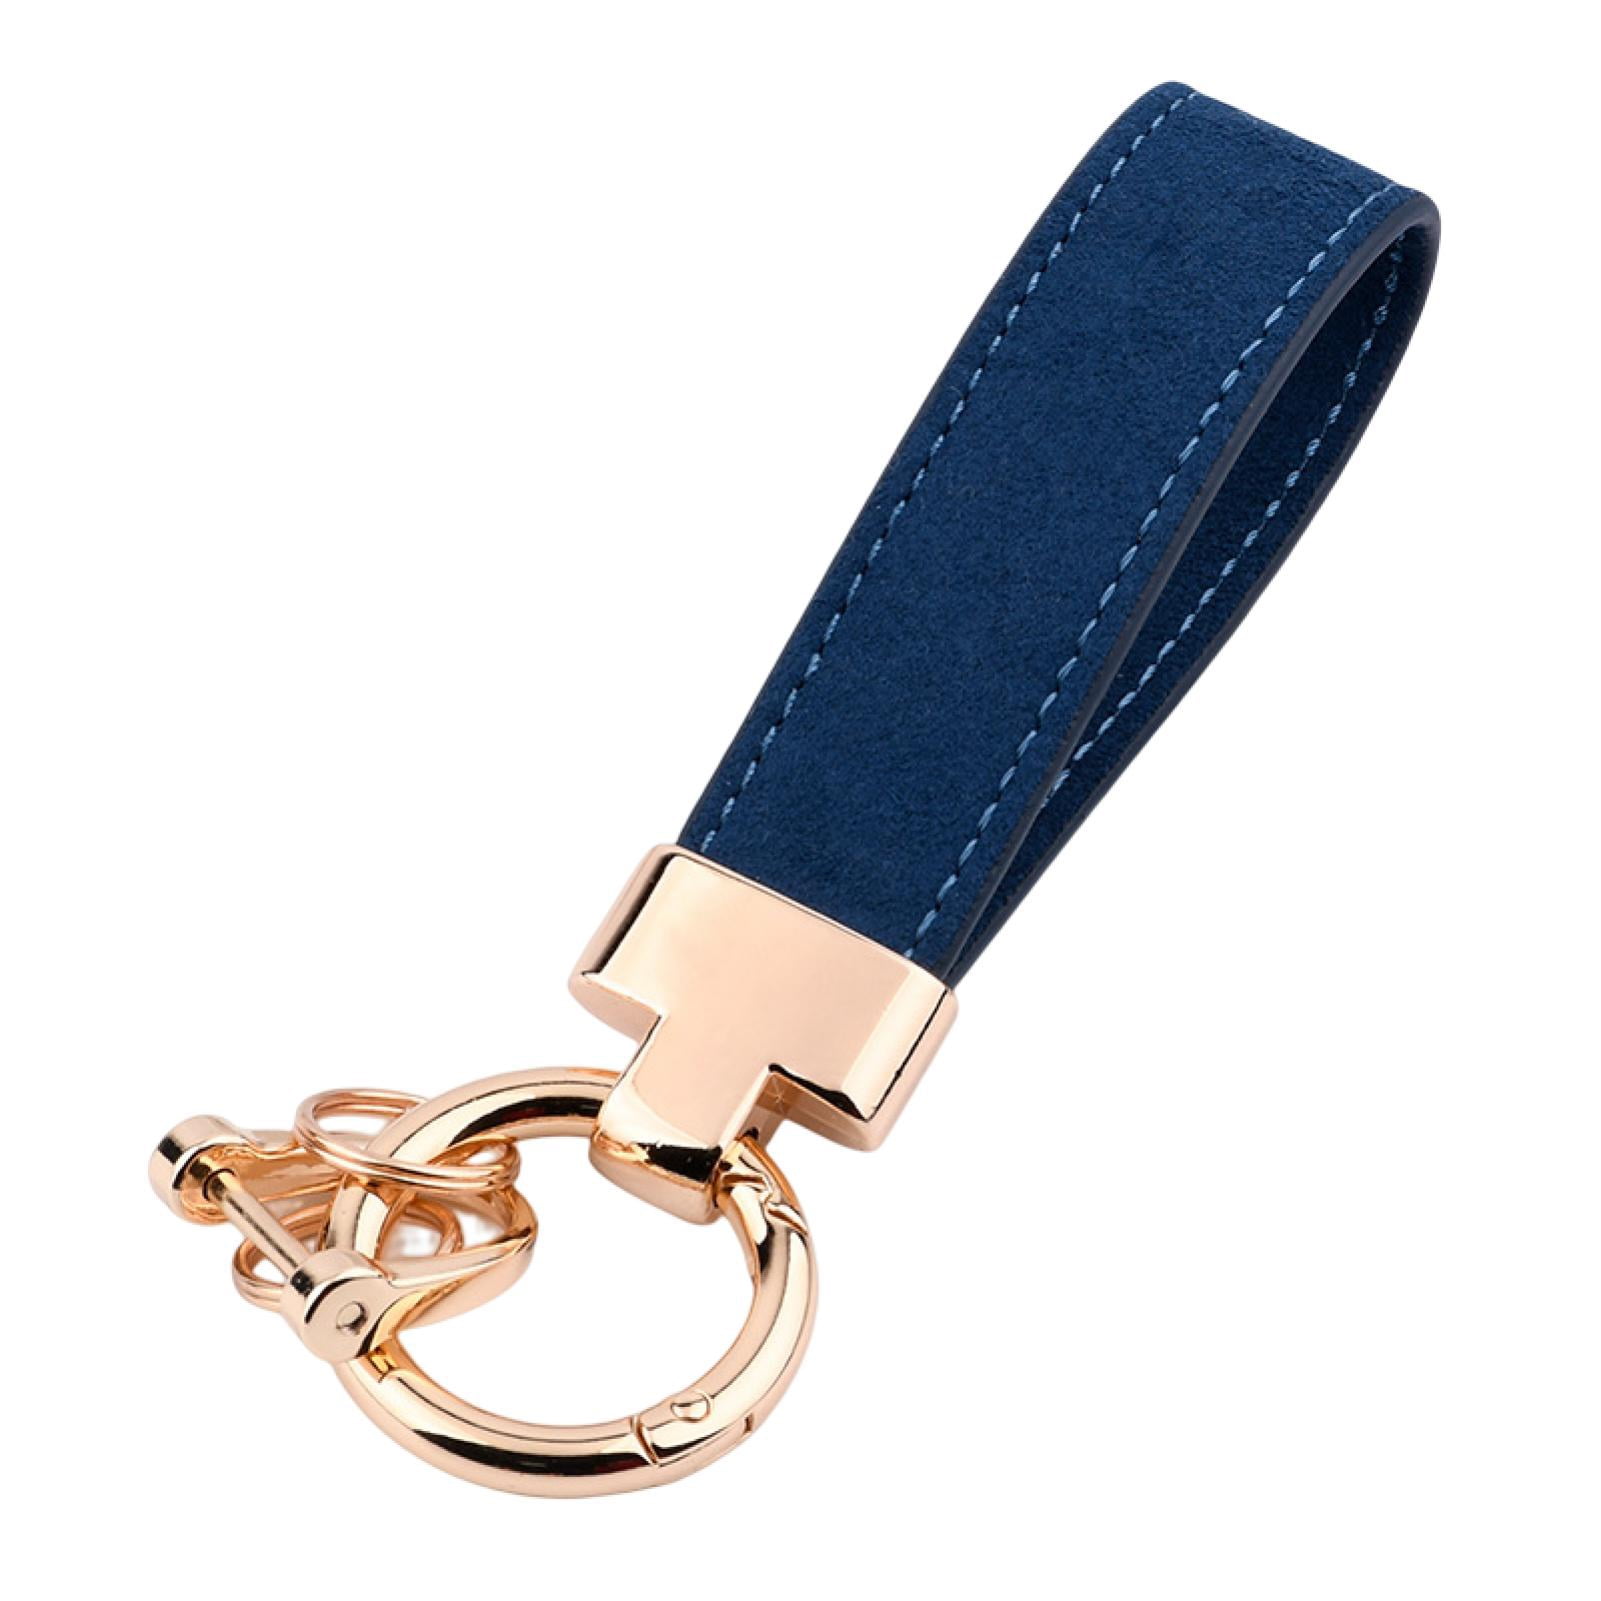 Liangery Keychain for Men Women Leather Car Key Chain with 5 Key Rings-Drive Safely Have Fun Keychain Holder for Keys